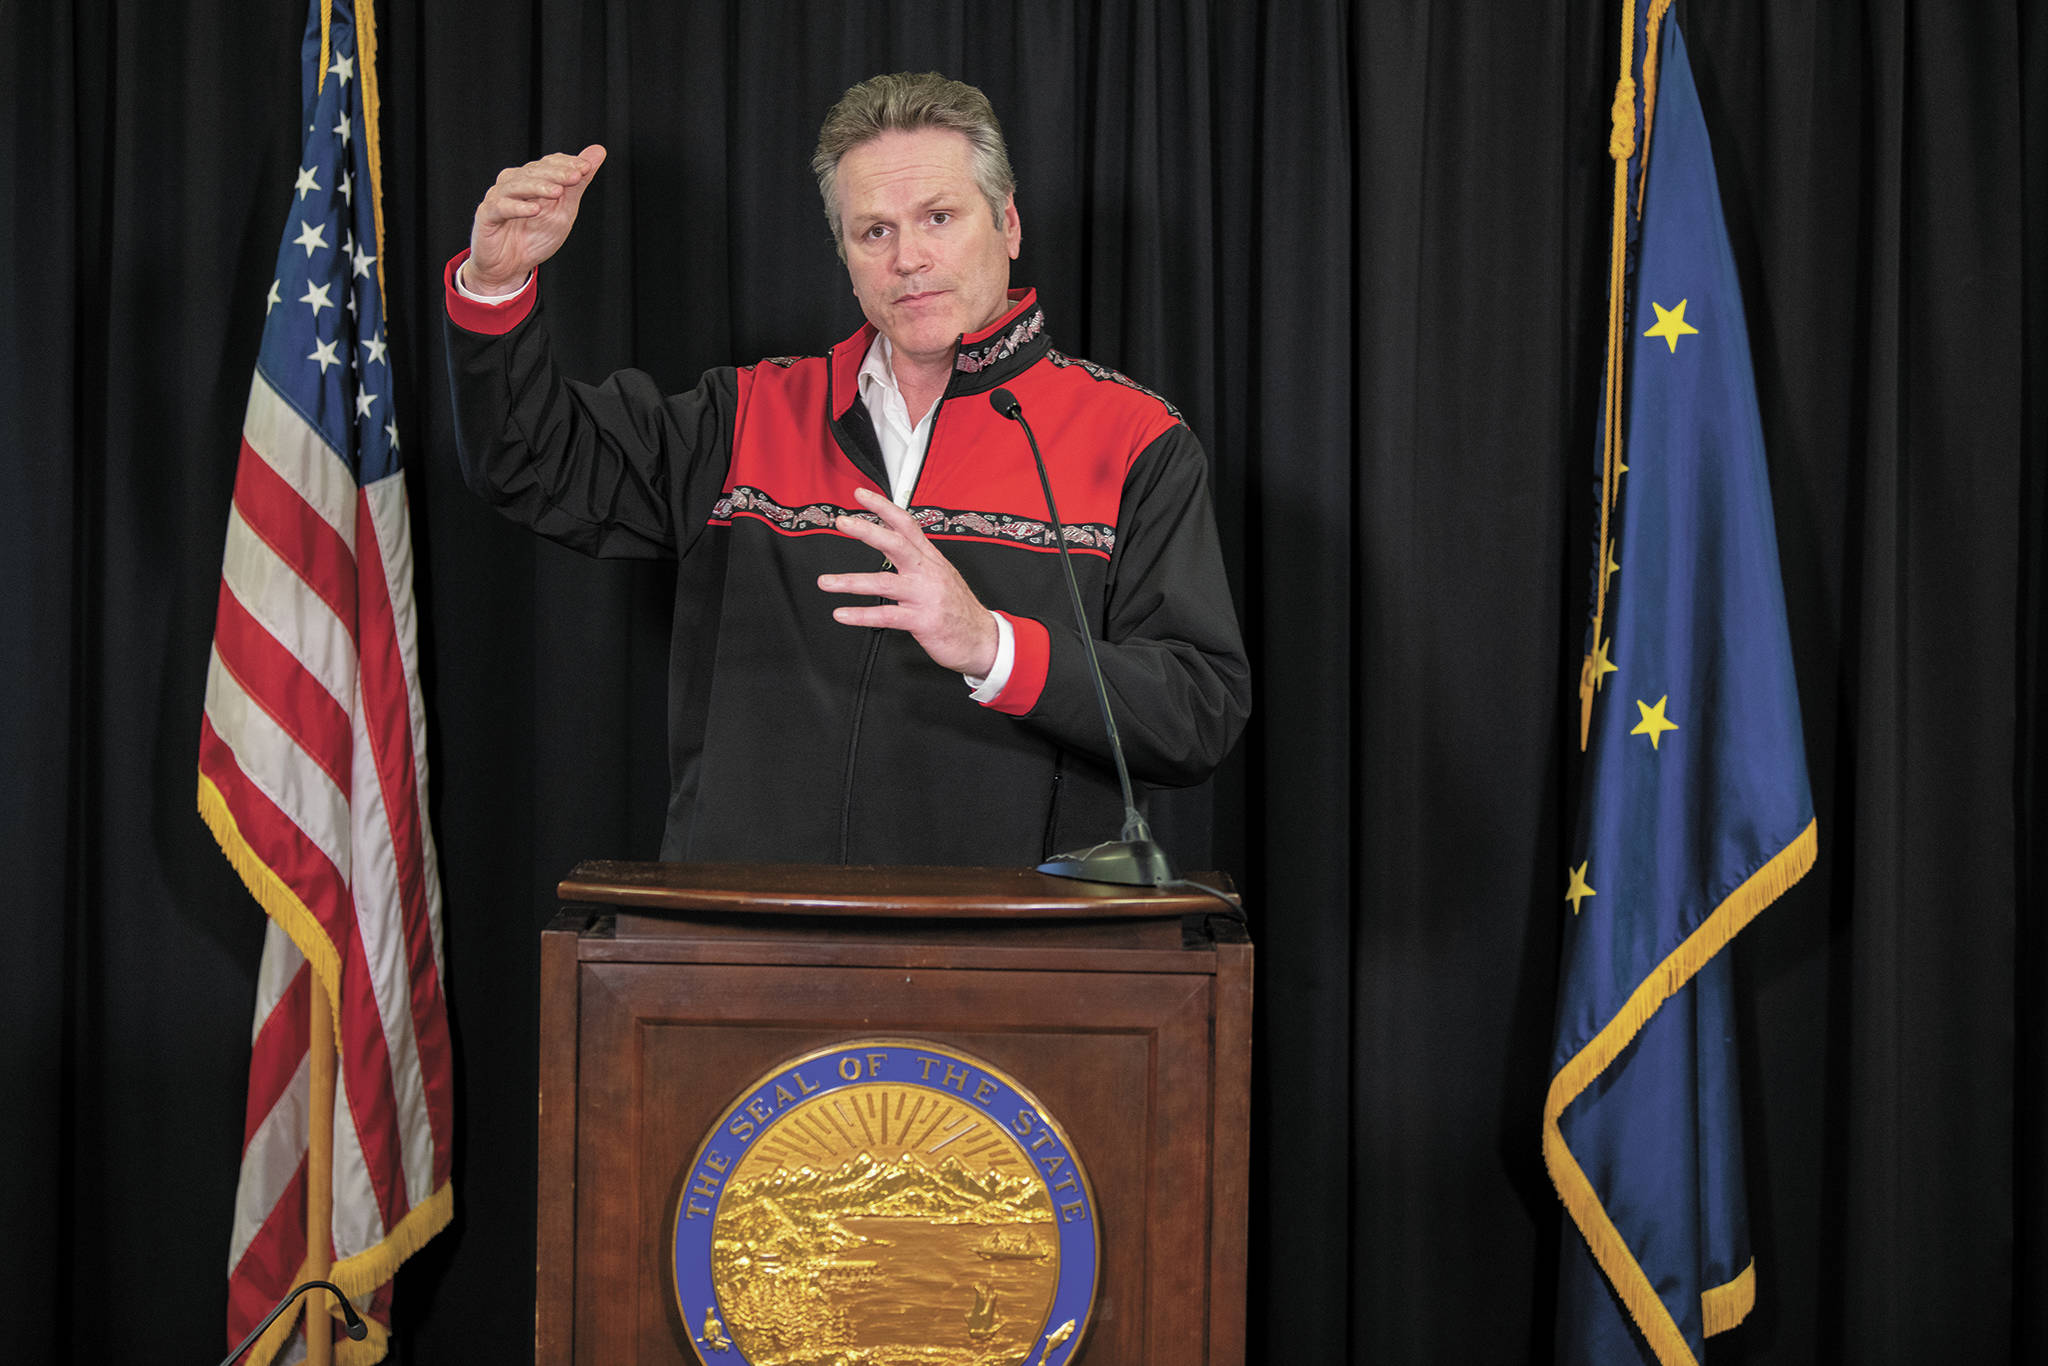 Gov. Mike Dunleavy speaks during a Monday, April 20, 2020 press conference in the Atwood Building in Anchorage, Alaska. (Photo courtesy Office of the Governor)